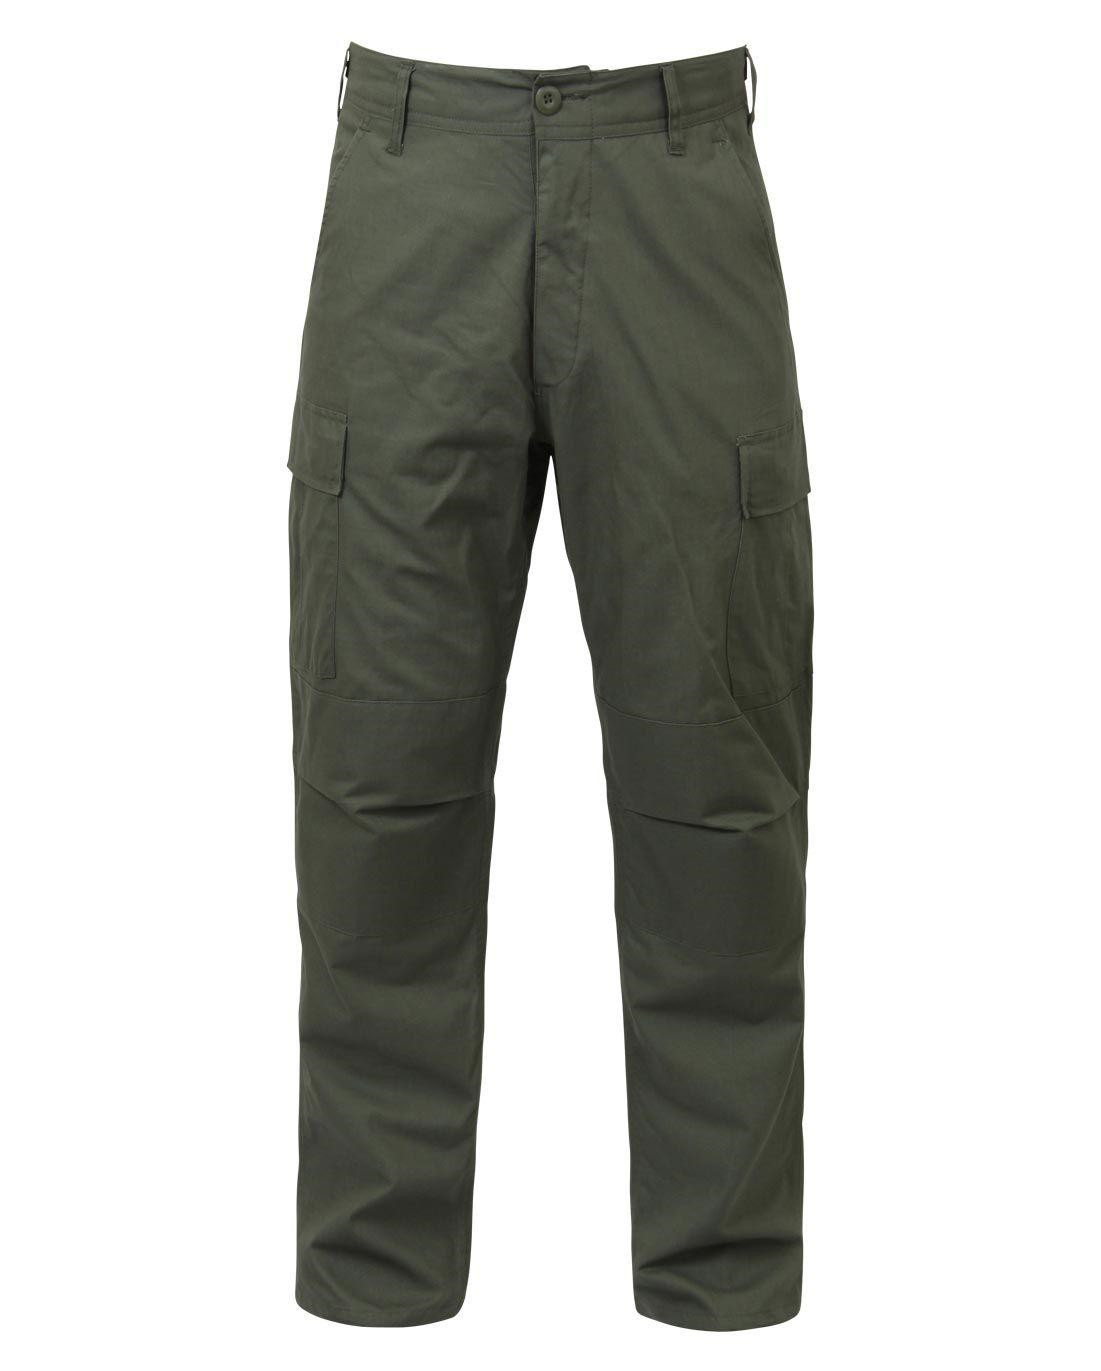 9: Rothco BDU Bukser i Rip-Stop (Oliven, Large / 35"-43")